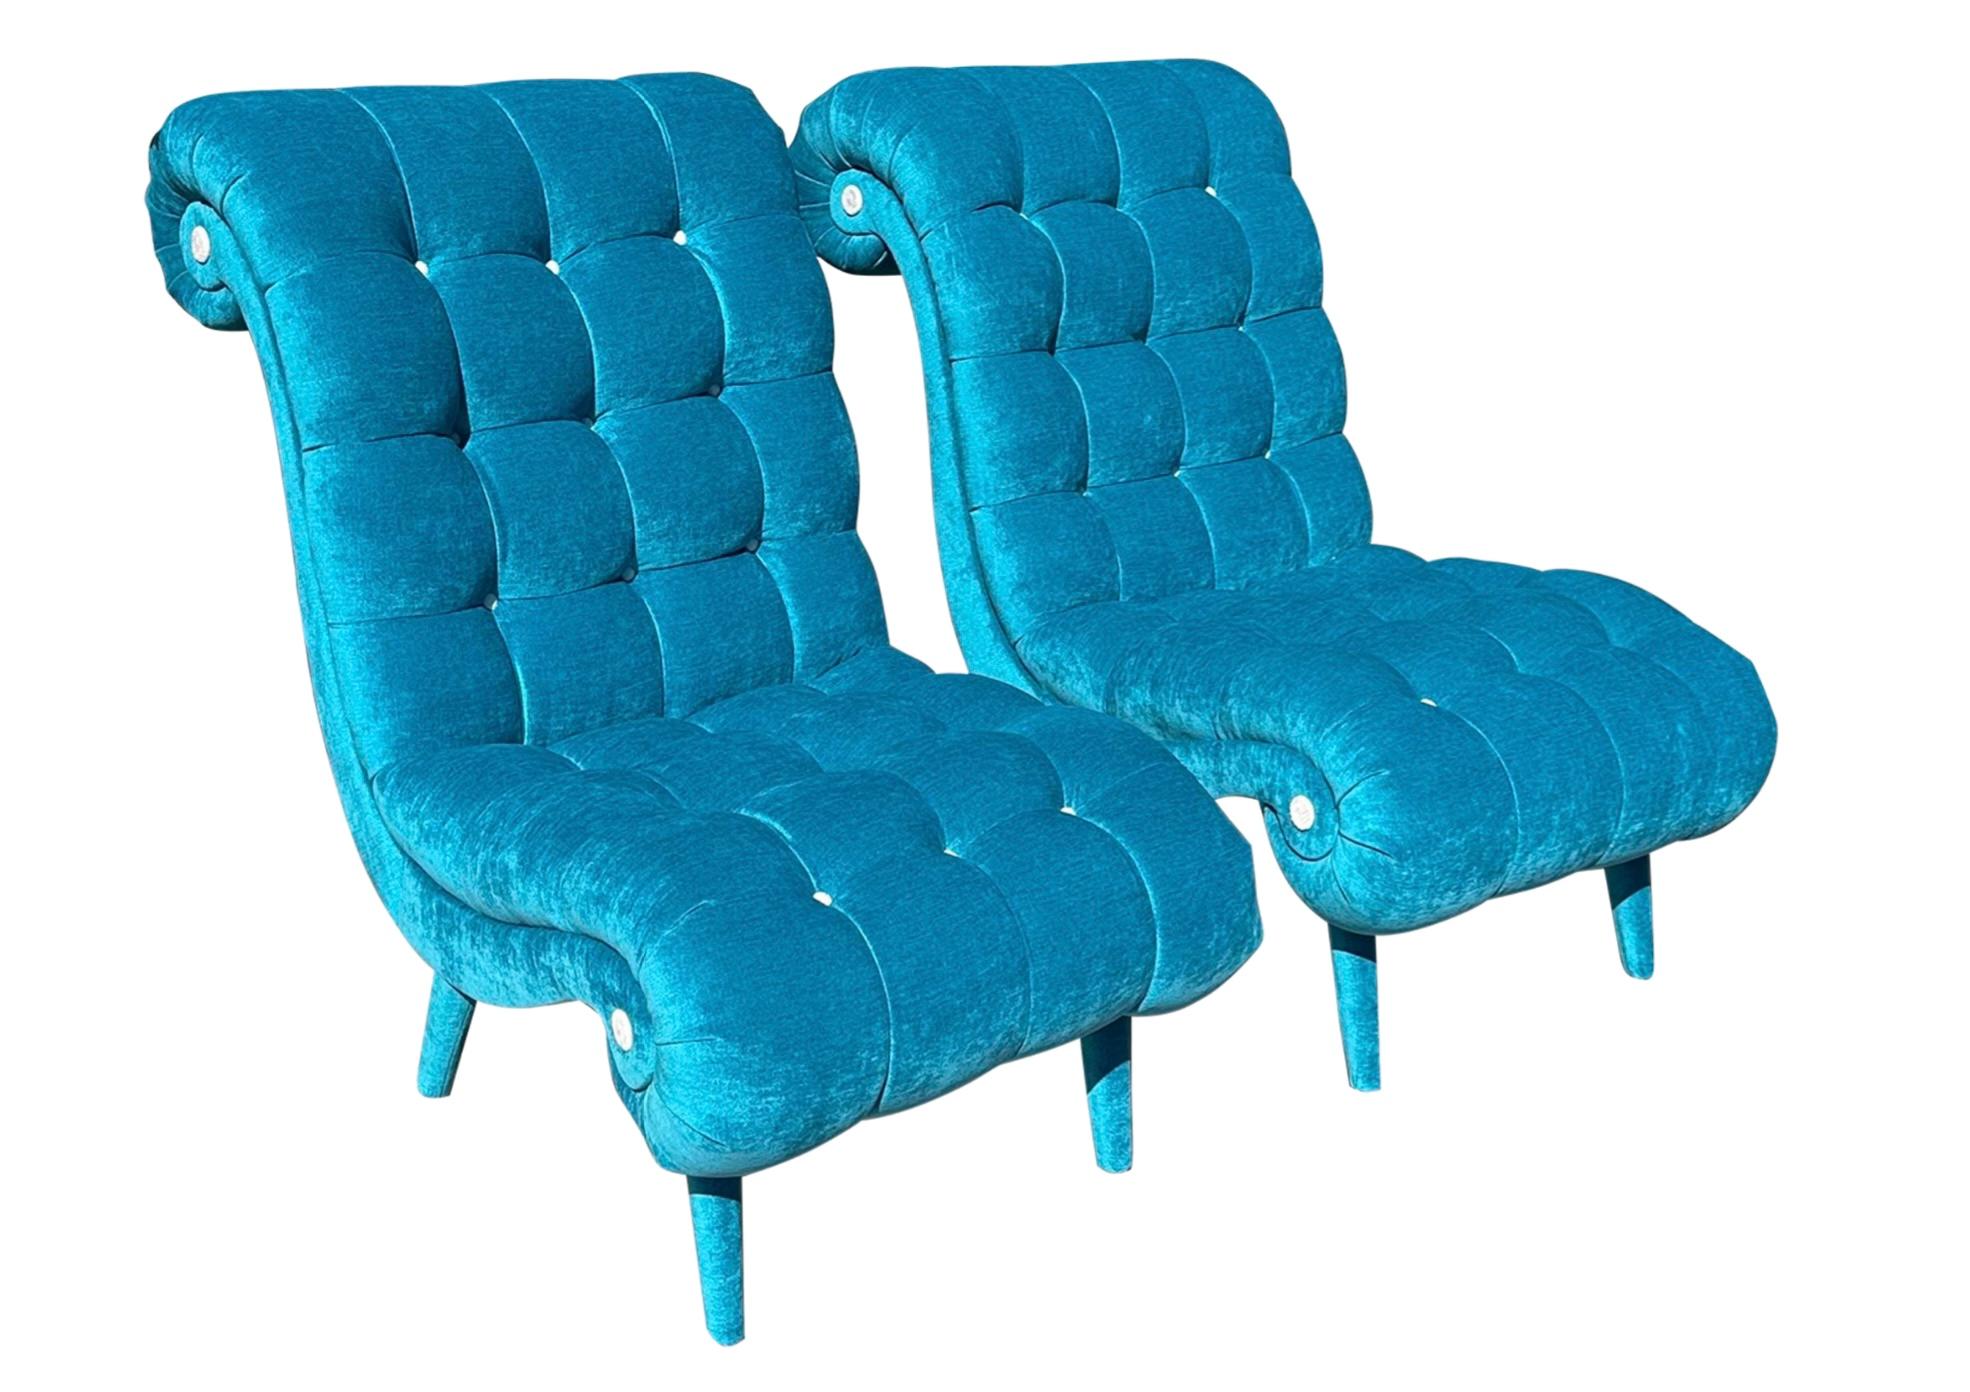 20th Century Pair of Mid Century Modern Tufted Turquoise Velvet Chairs For Sale